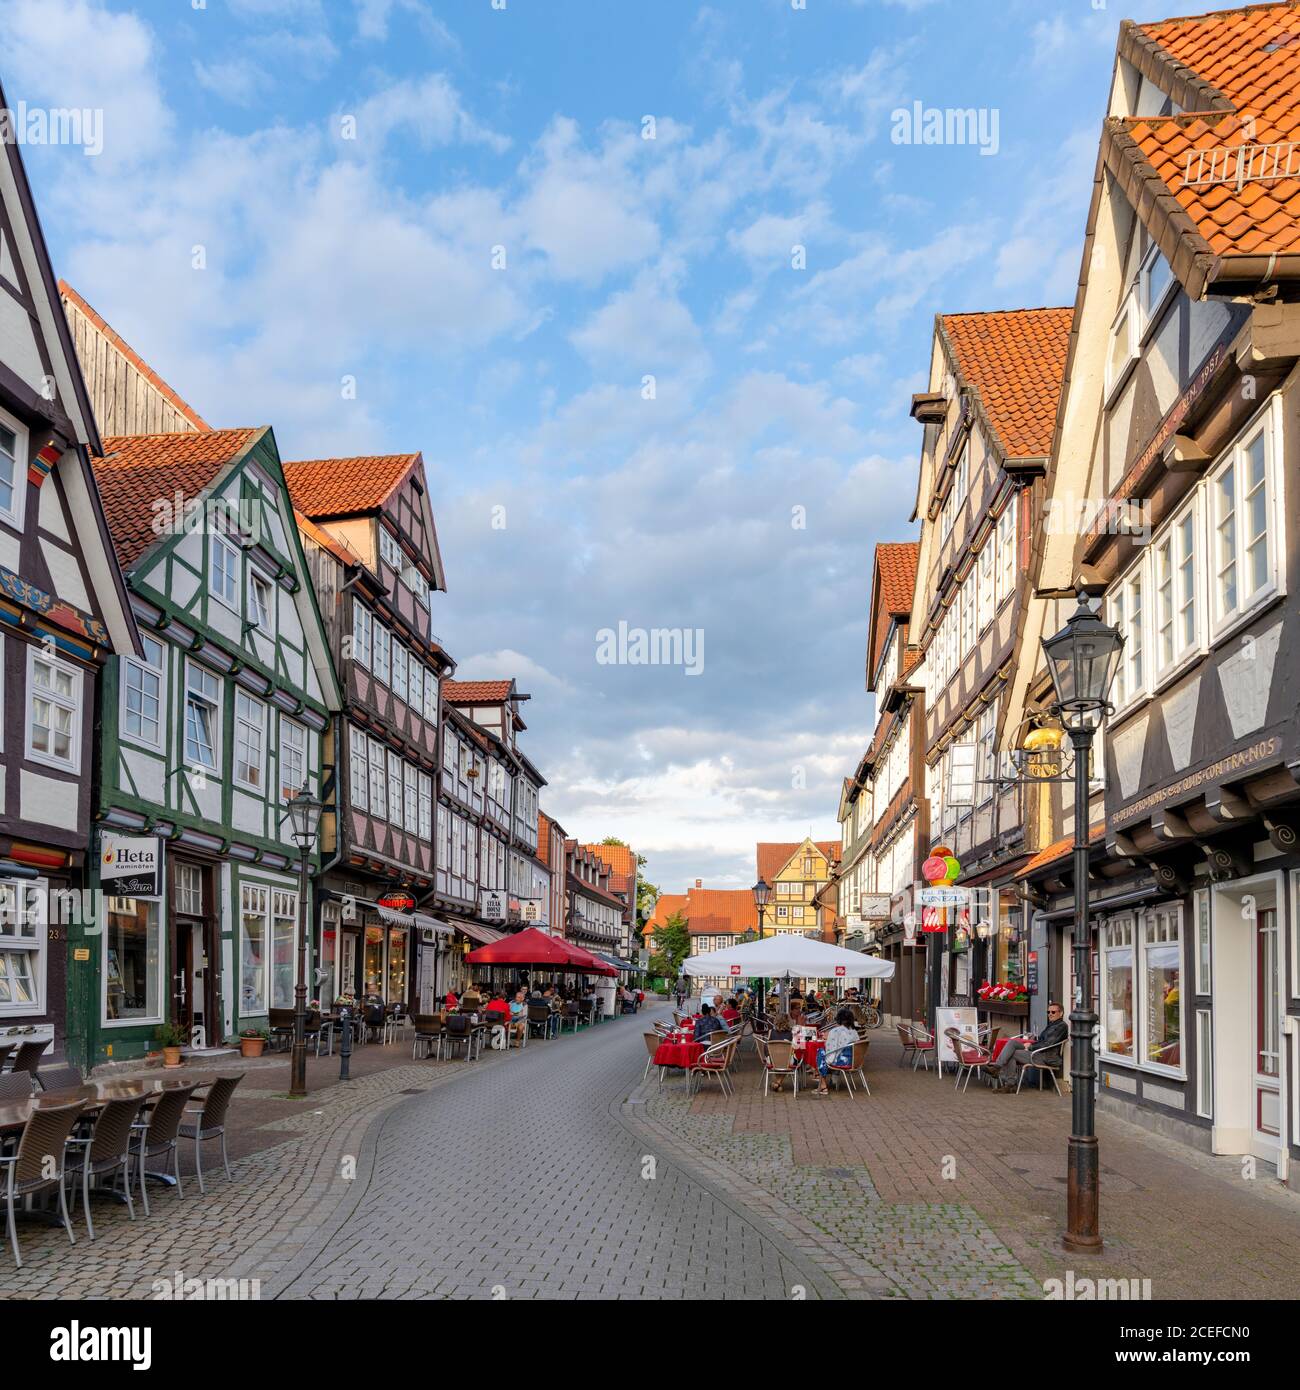 Celle, Niedersachsen / Germany - 3 August 2020: people enjoy a beautiful summer evening out in the streets of the historic old town of Celle Stock Photo